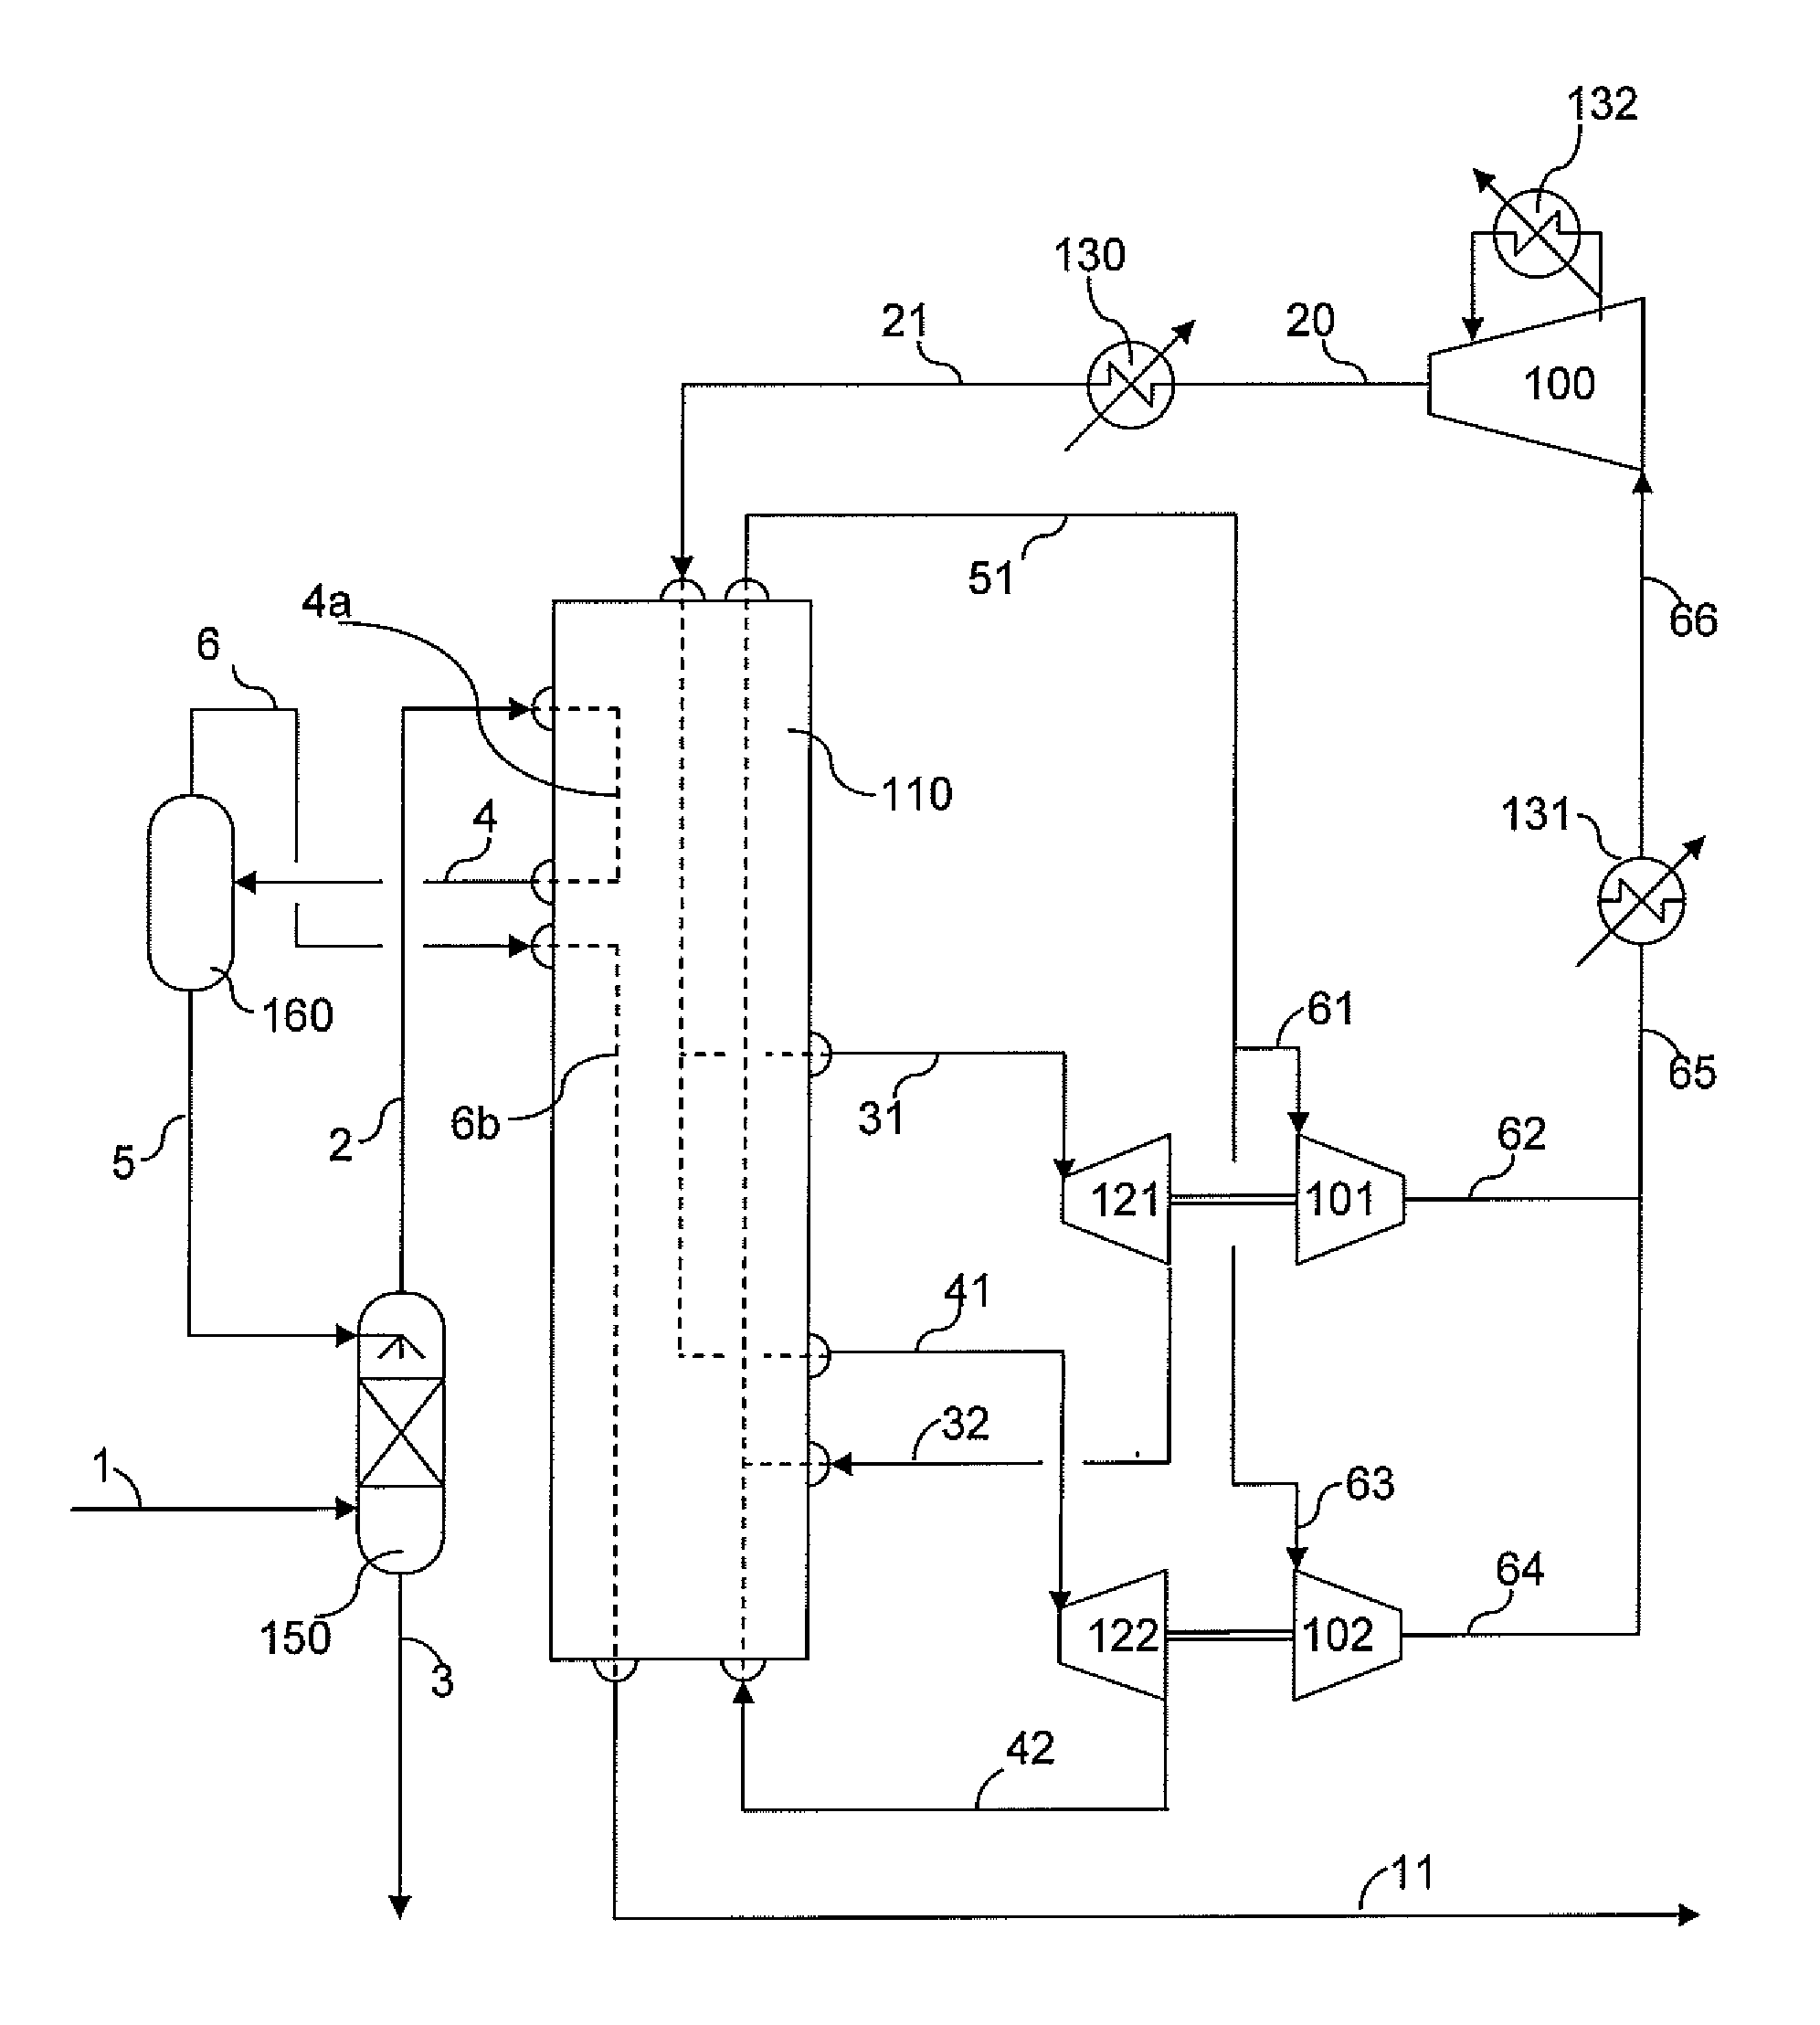 Method and system for producing liquefied natural gas (LNG)